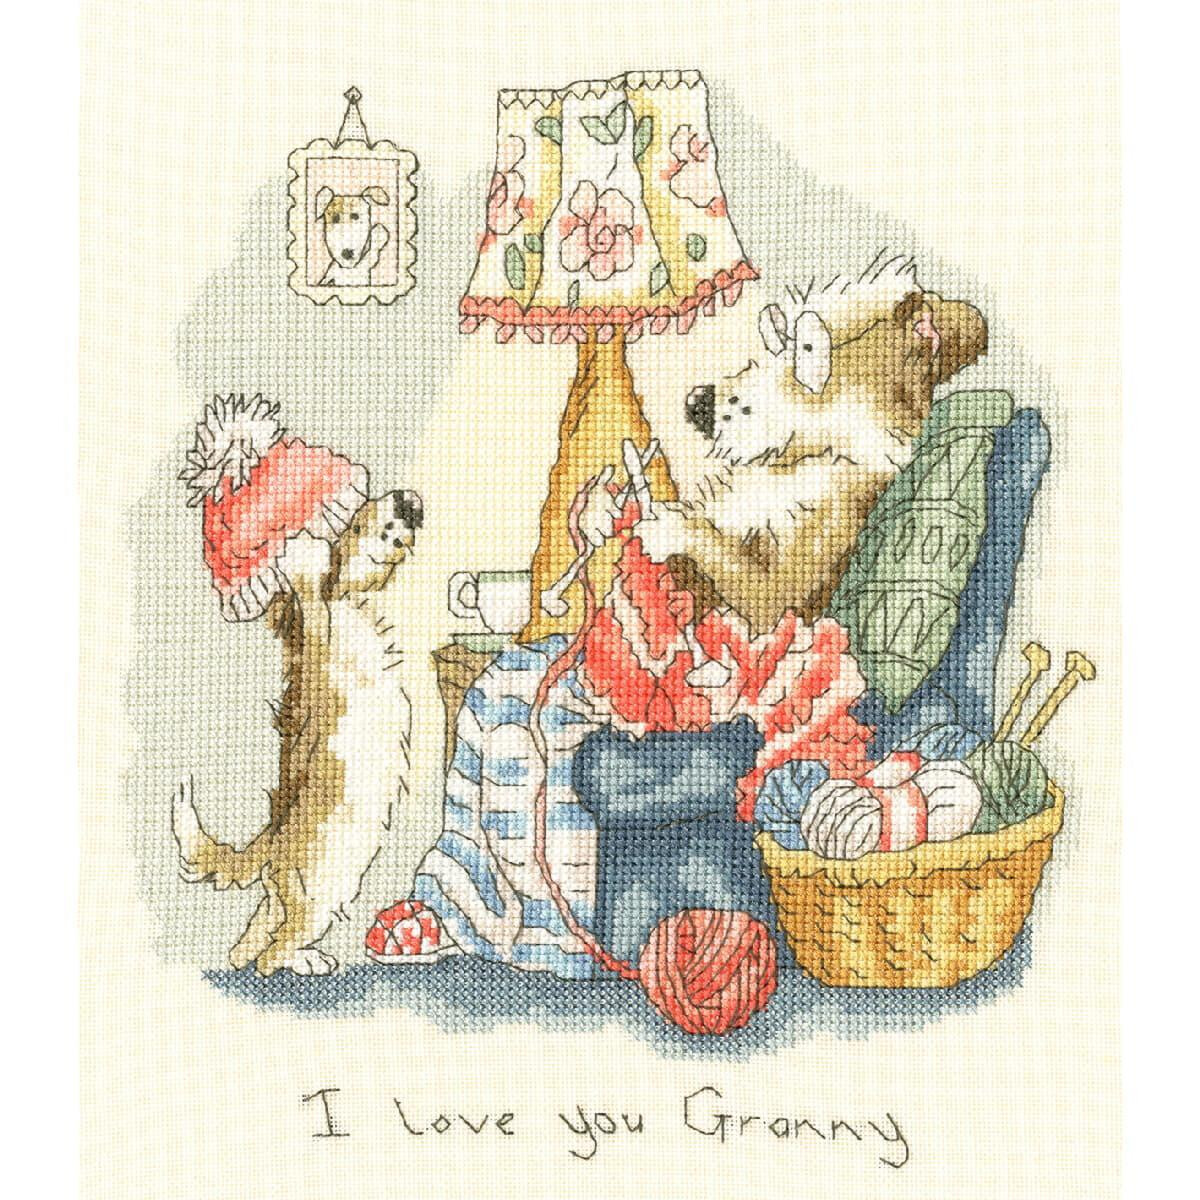 A whimsical illustration of a dog knitting in a cozy...